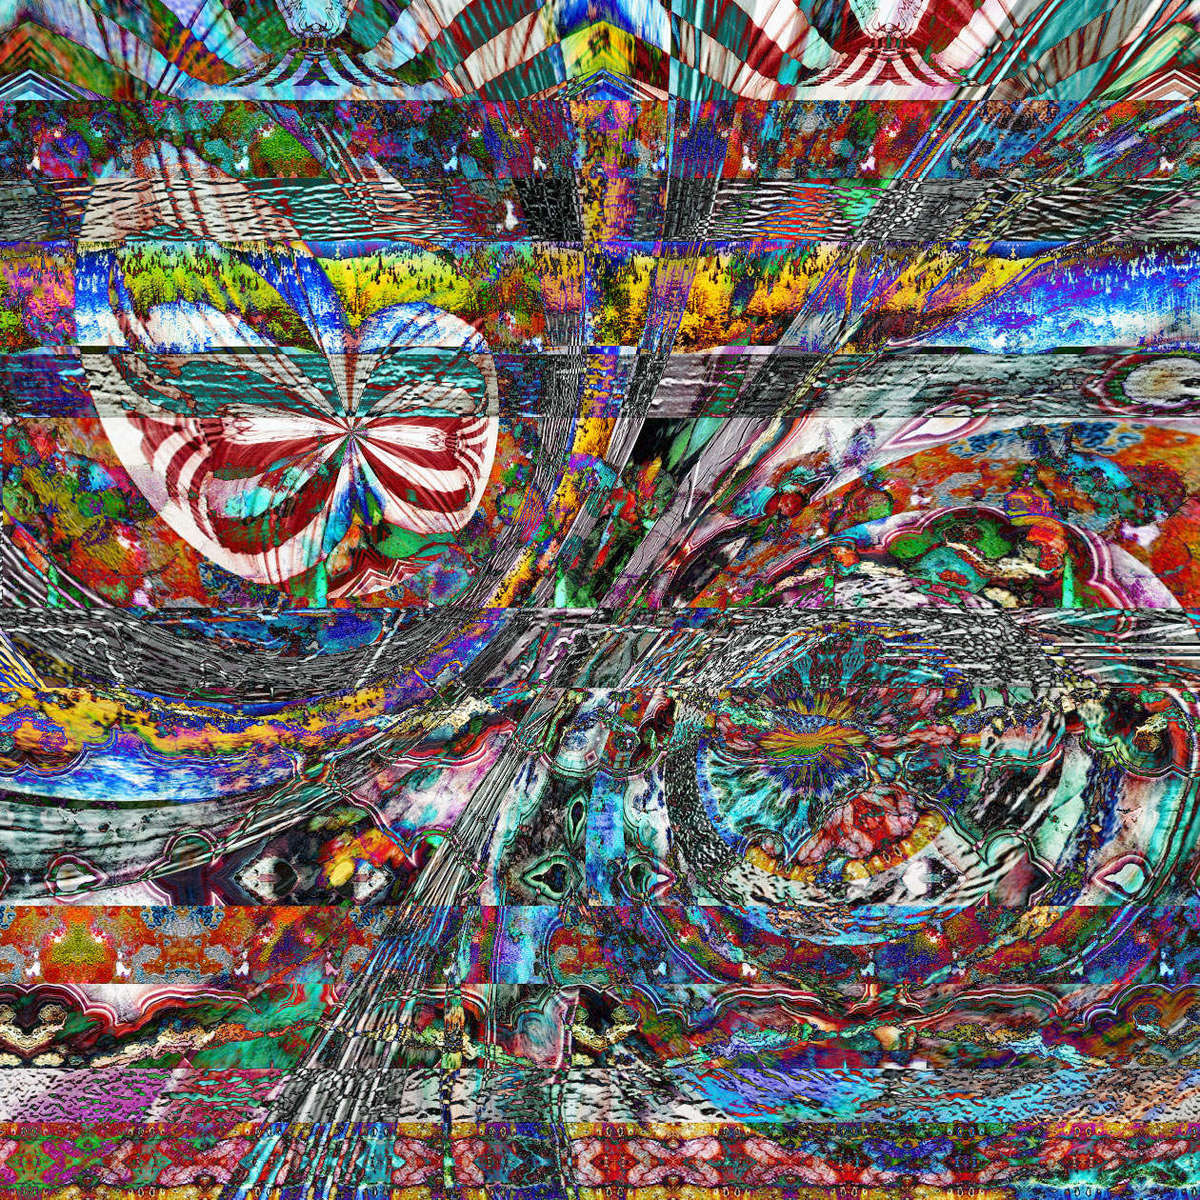 Happy_Jack_Out_Of_The_Box.jpg : Section 3 : American artist digital invention archival artifact color print image emerging capture creative convergent transparency universe dream history painter Hybrid exhibition